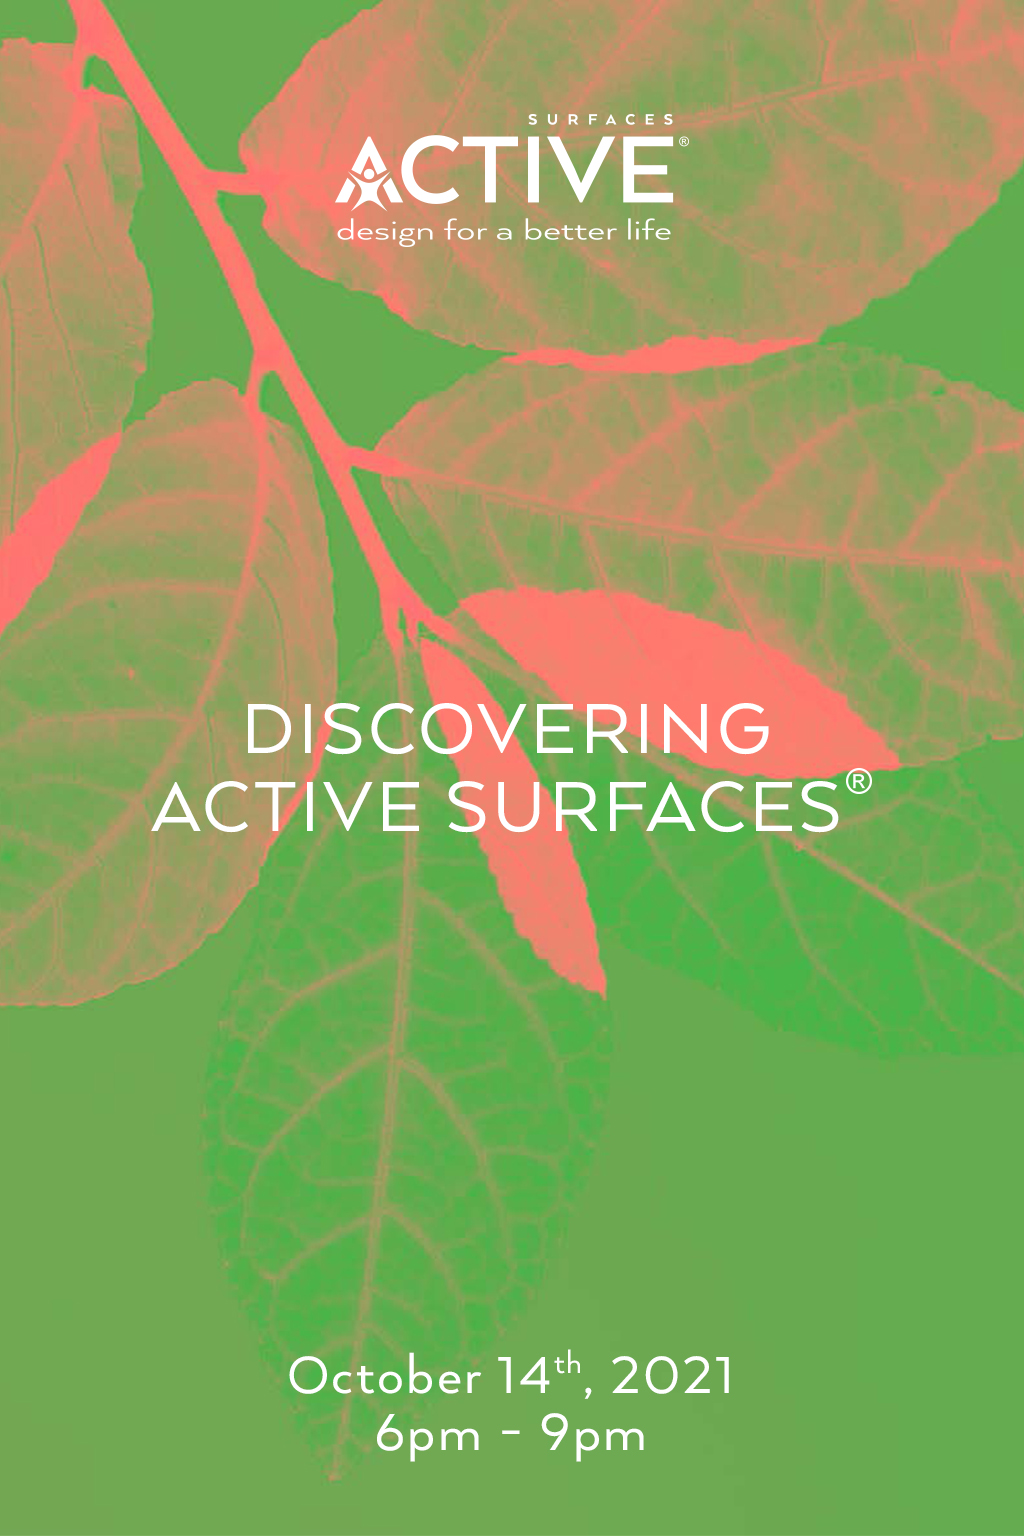 IL FLAGSHIP STORE DI LONDRA OSPITA L’EVENTO “DISCOVERING ACTIVE SURFACES<sup>®</sup>”